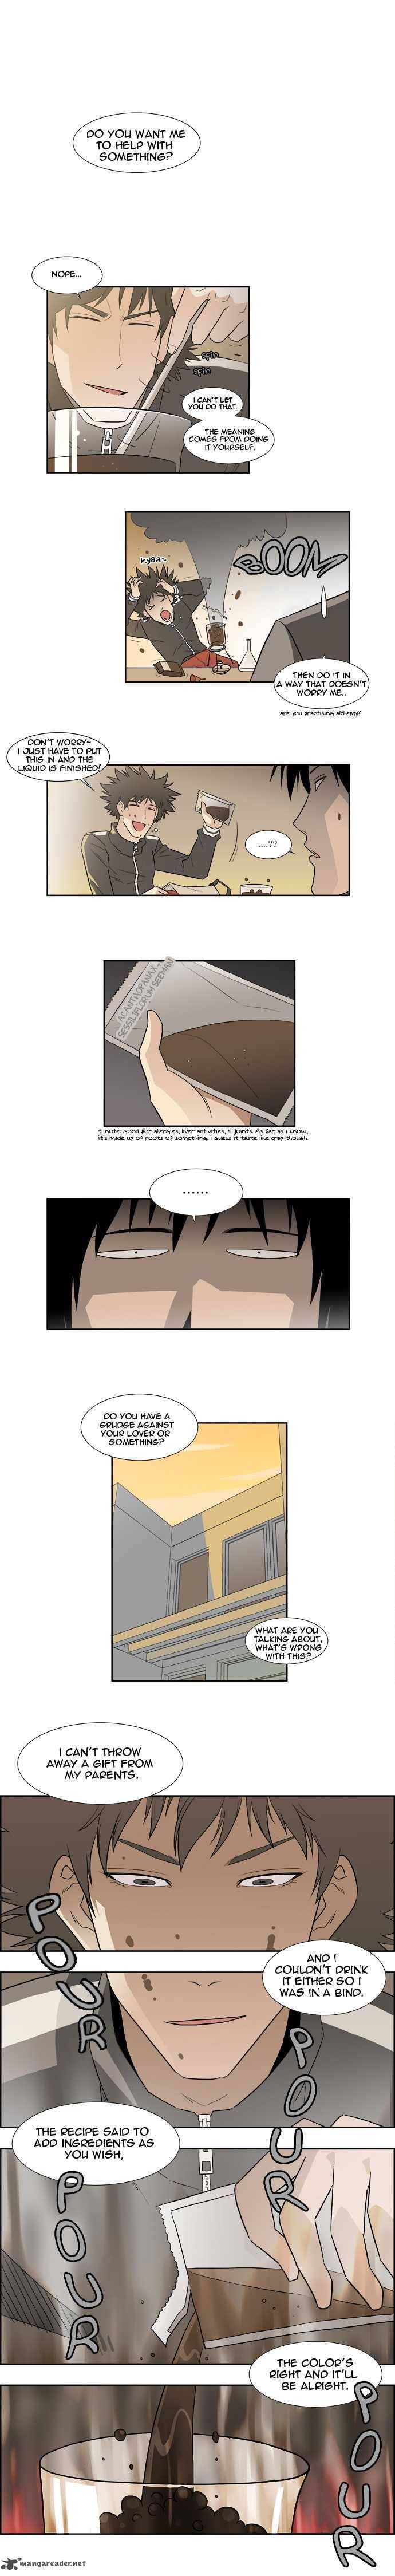 Melo Holic Chapter 2 Page 3